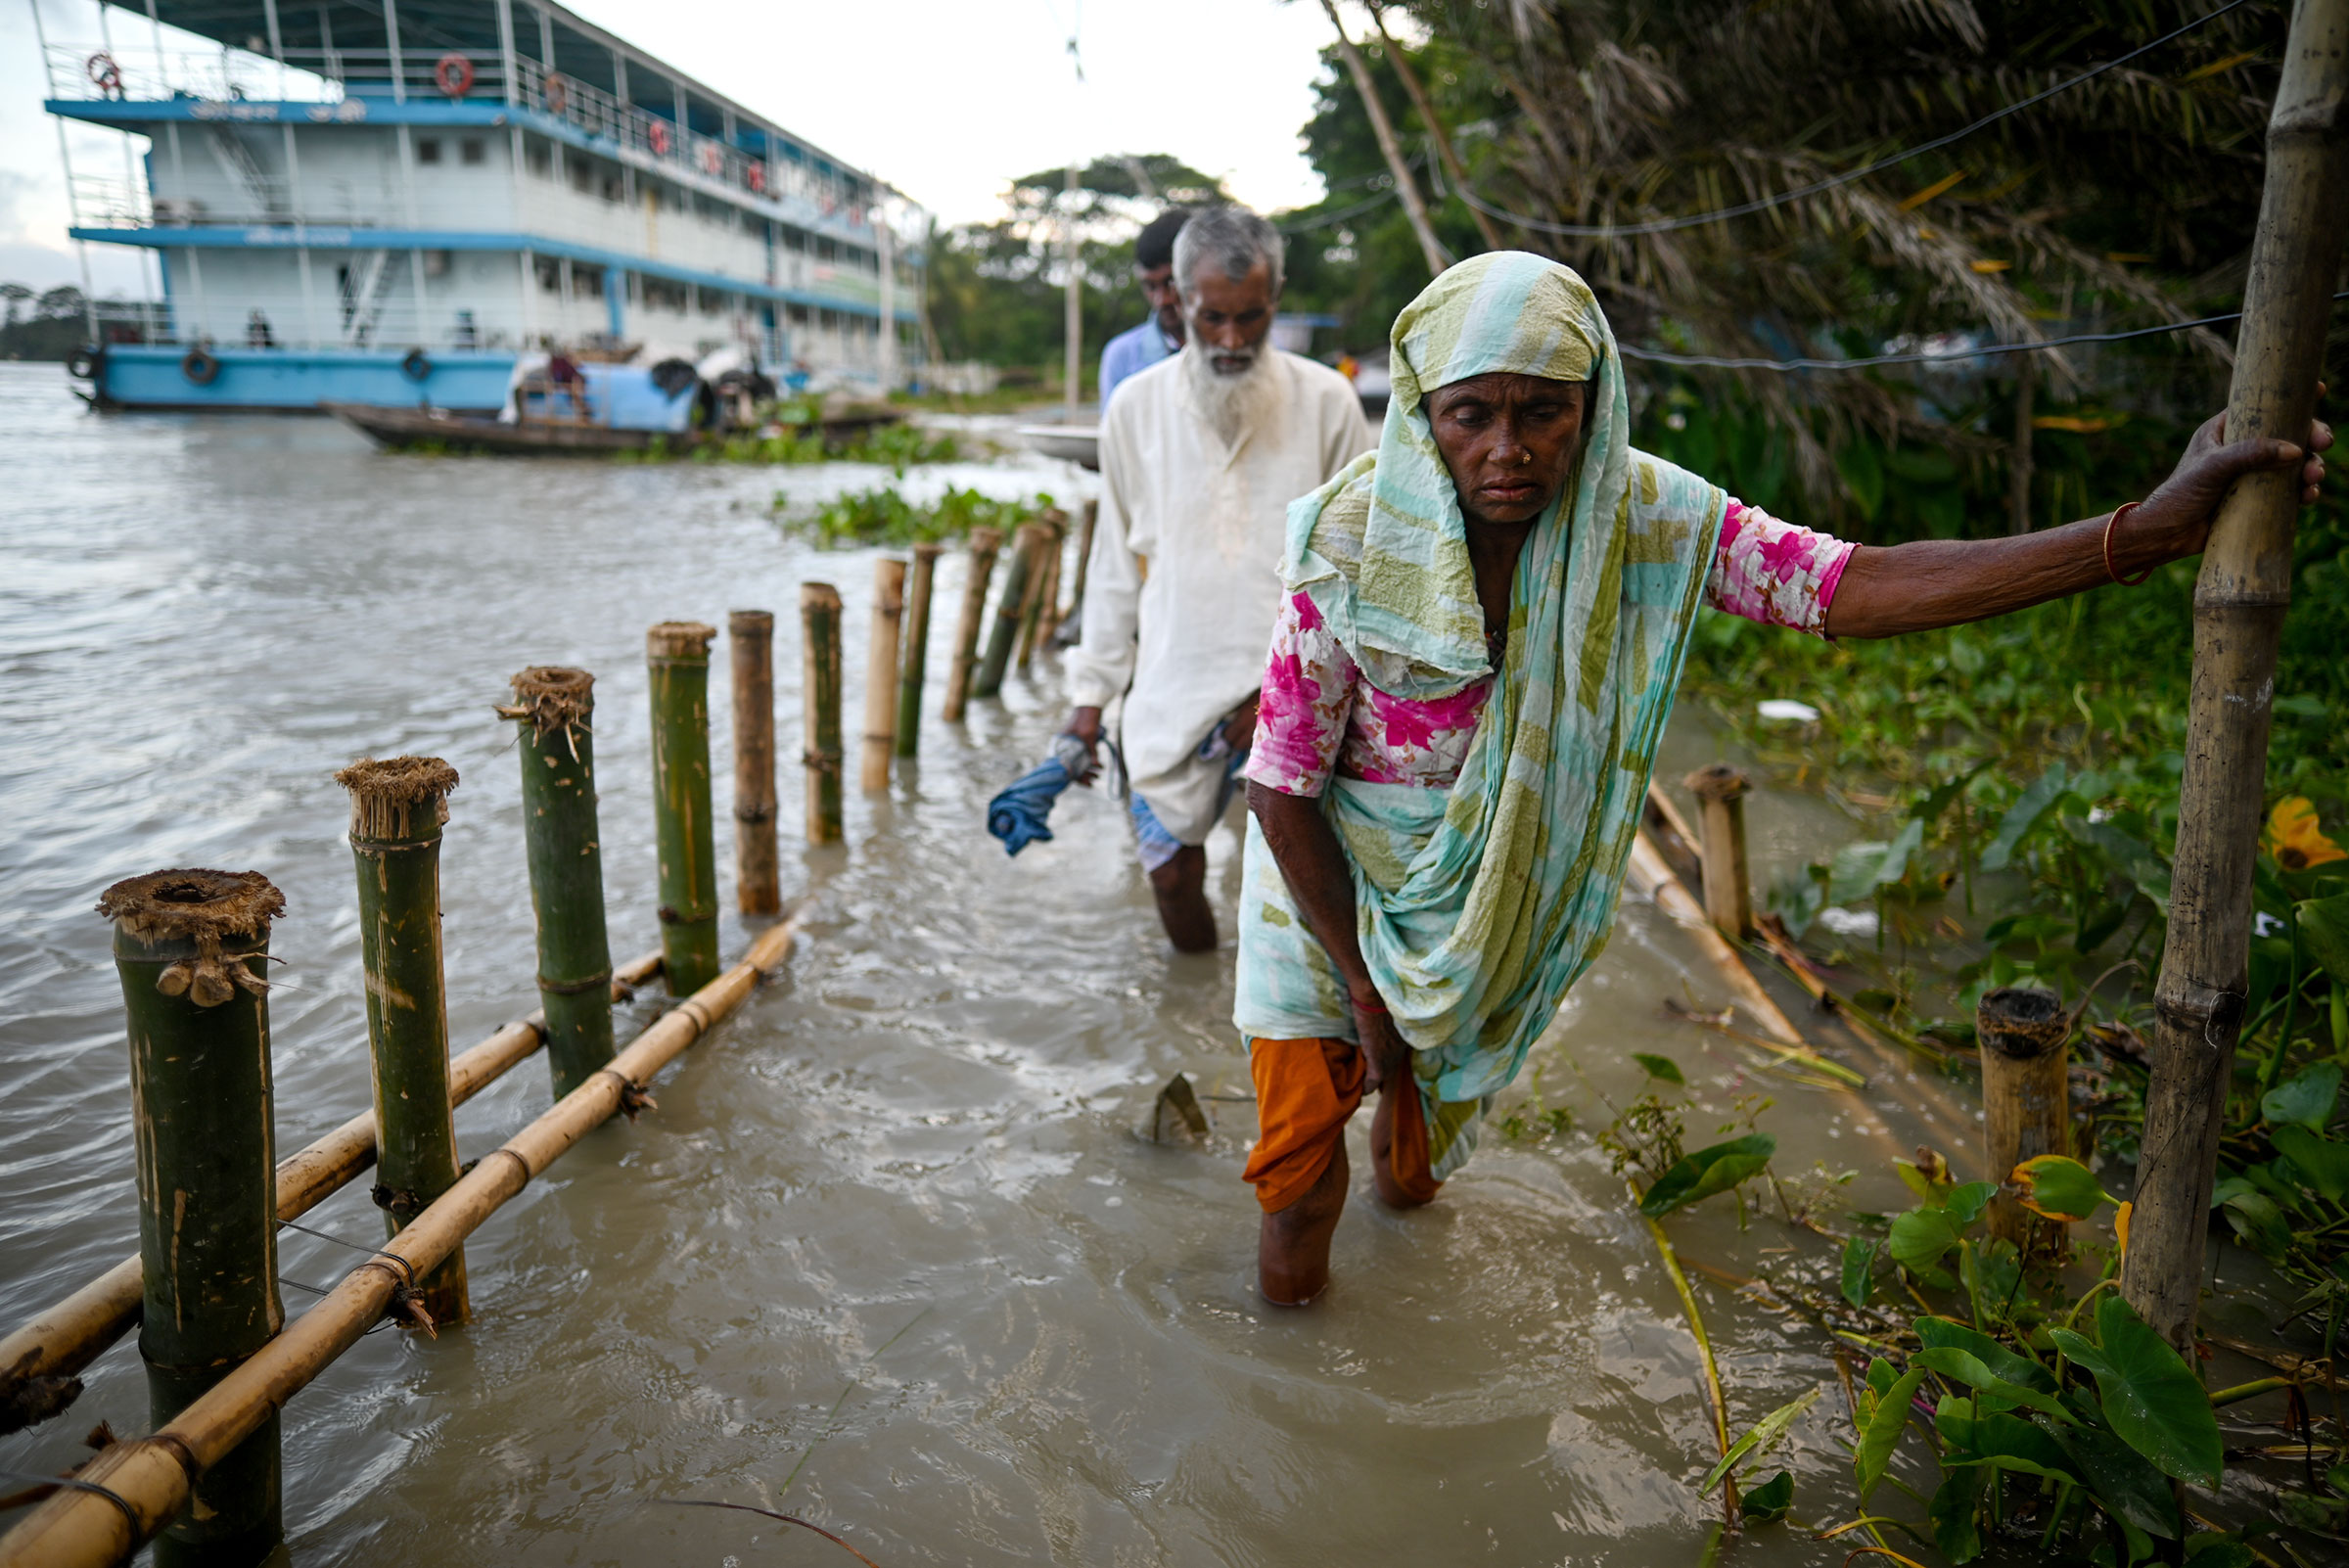 A woman walks through shin-deep floodwater, along with several others